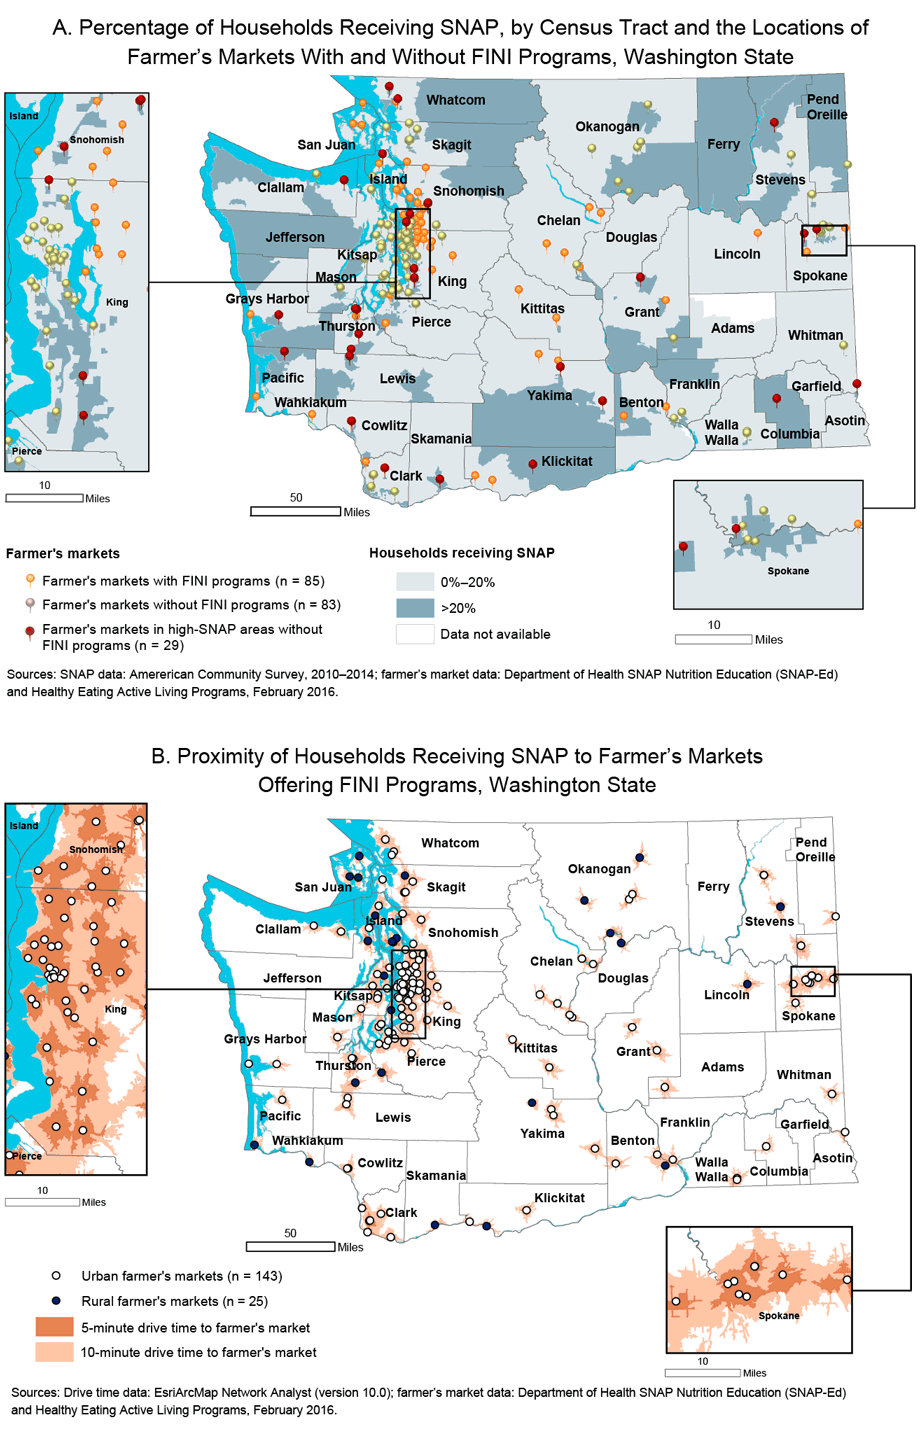 	Food Insecurity Nutrition Incentive (FINI) programs incentivize Supplemental Nutrition Assistance Program (SNAP) participants to purchase more fruits and vegetables. The Washington State Department of Health developed these maps of the state to 1) assess the geographic distribution of farmer’s markets with FINI programs in relation to areas with high SNAP populations (>20% of households participate in SNAP) (panel A); 2) estimate the number of SNAP households with reasonable proximity to farmer’s market offering FINI programs (panel B); and 3) identify farmer’s markets that should be prioritized for future SNAP incentive programming. 